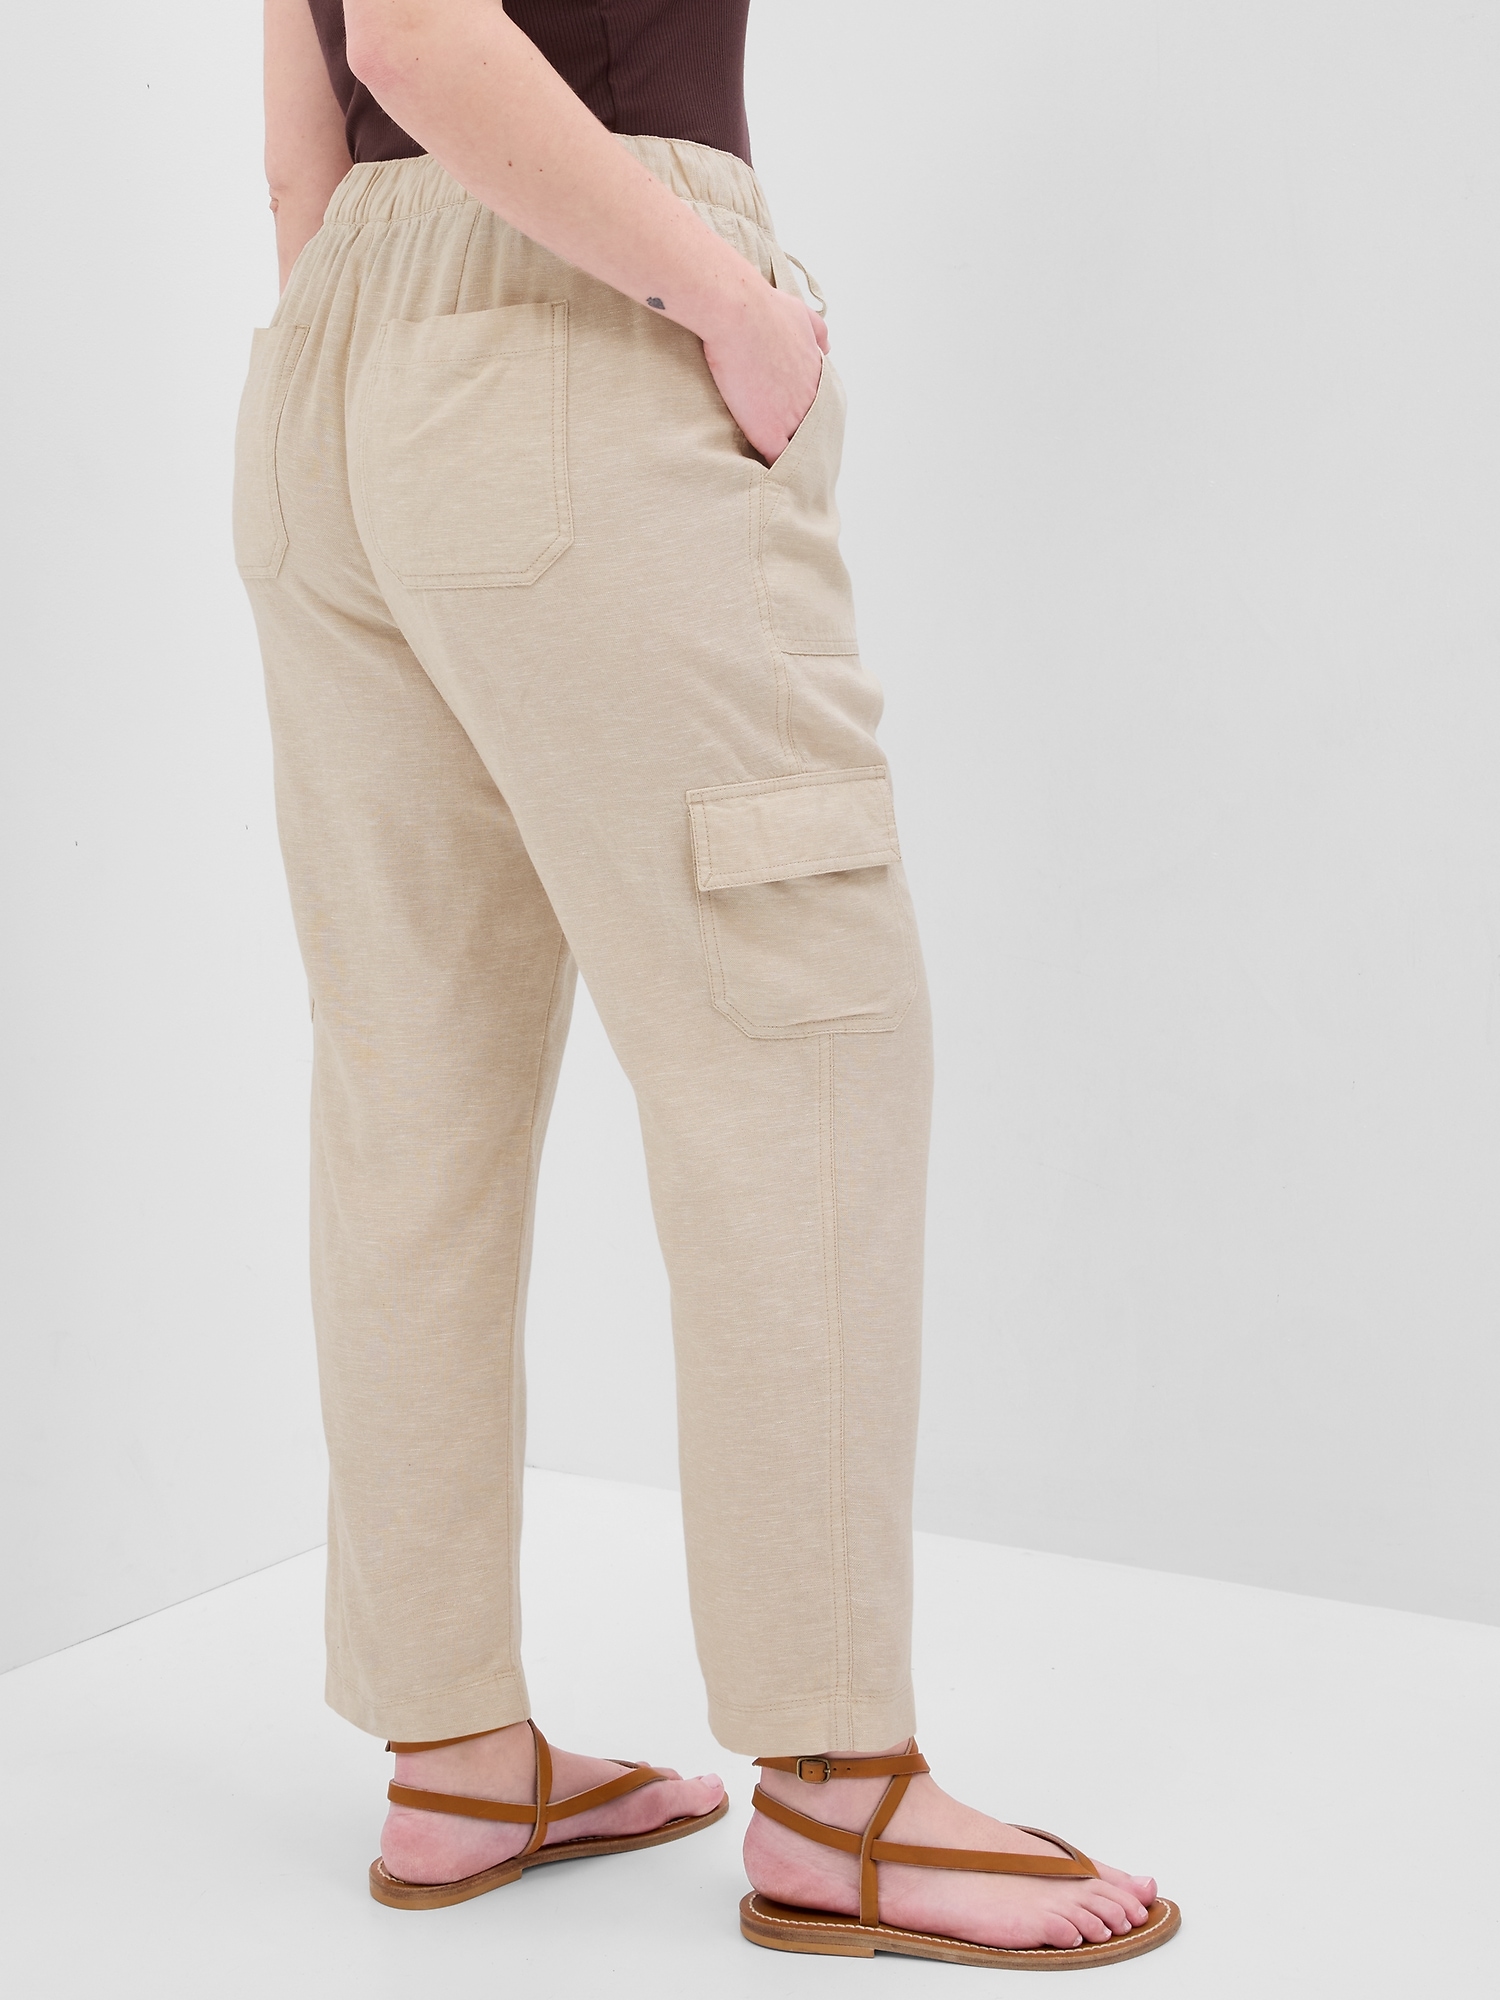 Linen Easy Cargo Pants with Washwell | Gap Factory